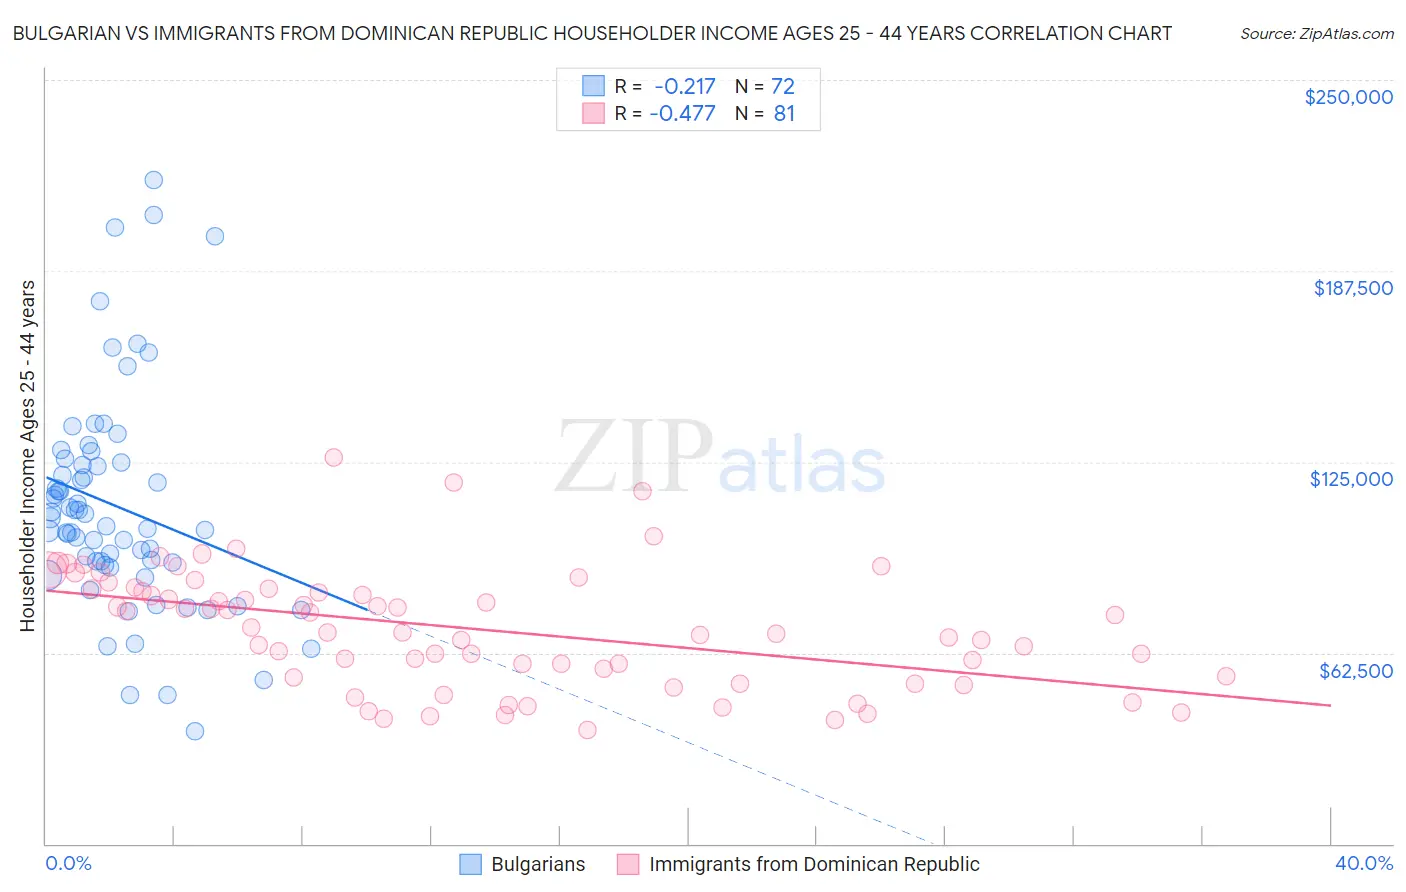 Bulgarian vs Immigrants from Dominican Republic Householder Income Ages 25 - 44 years